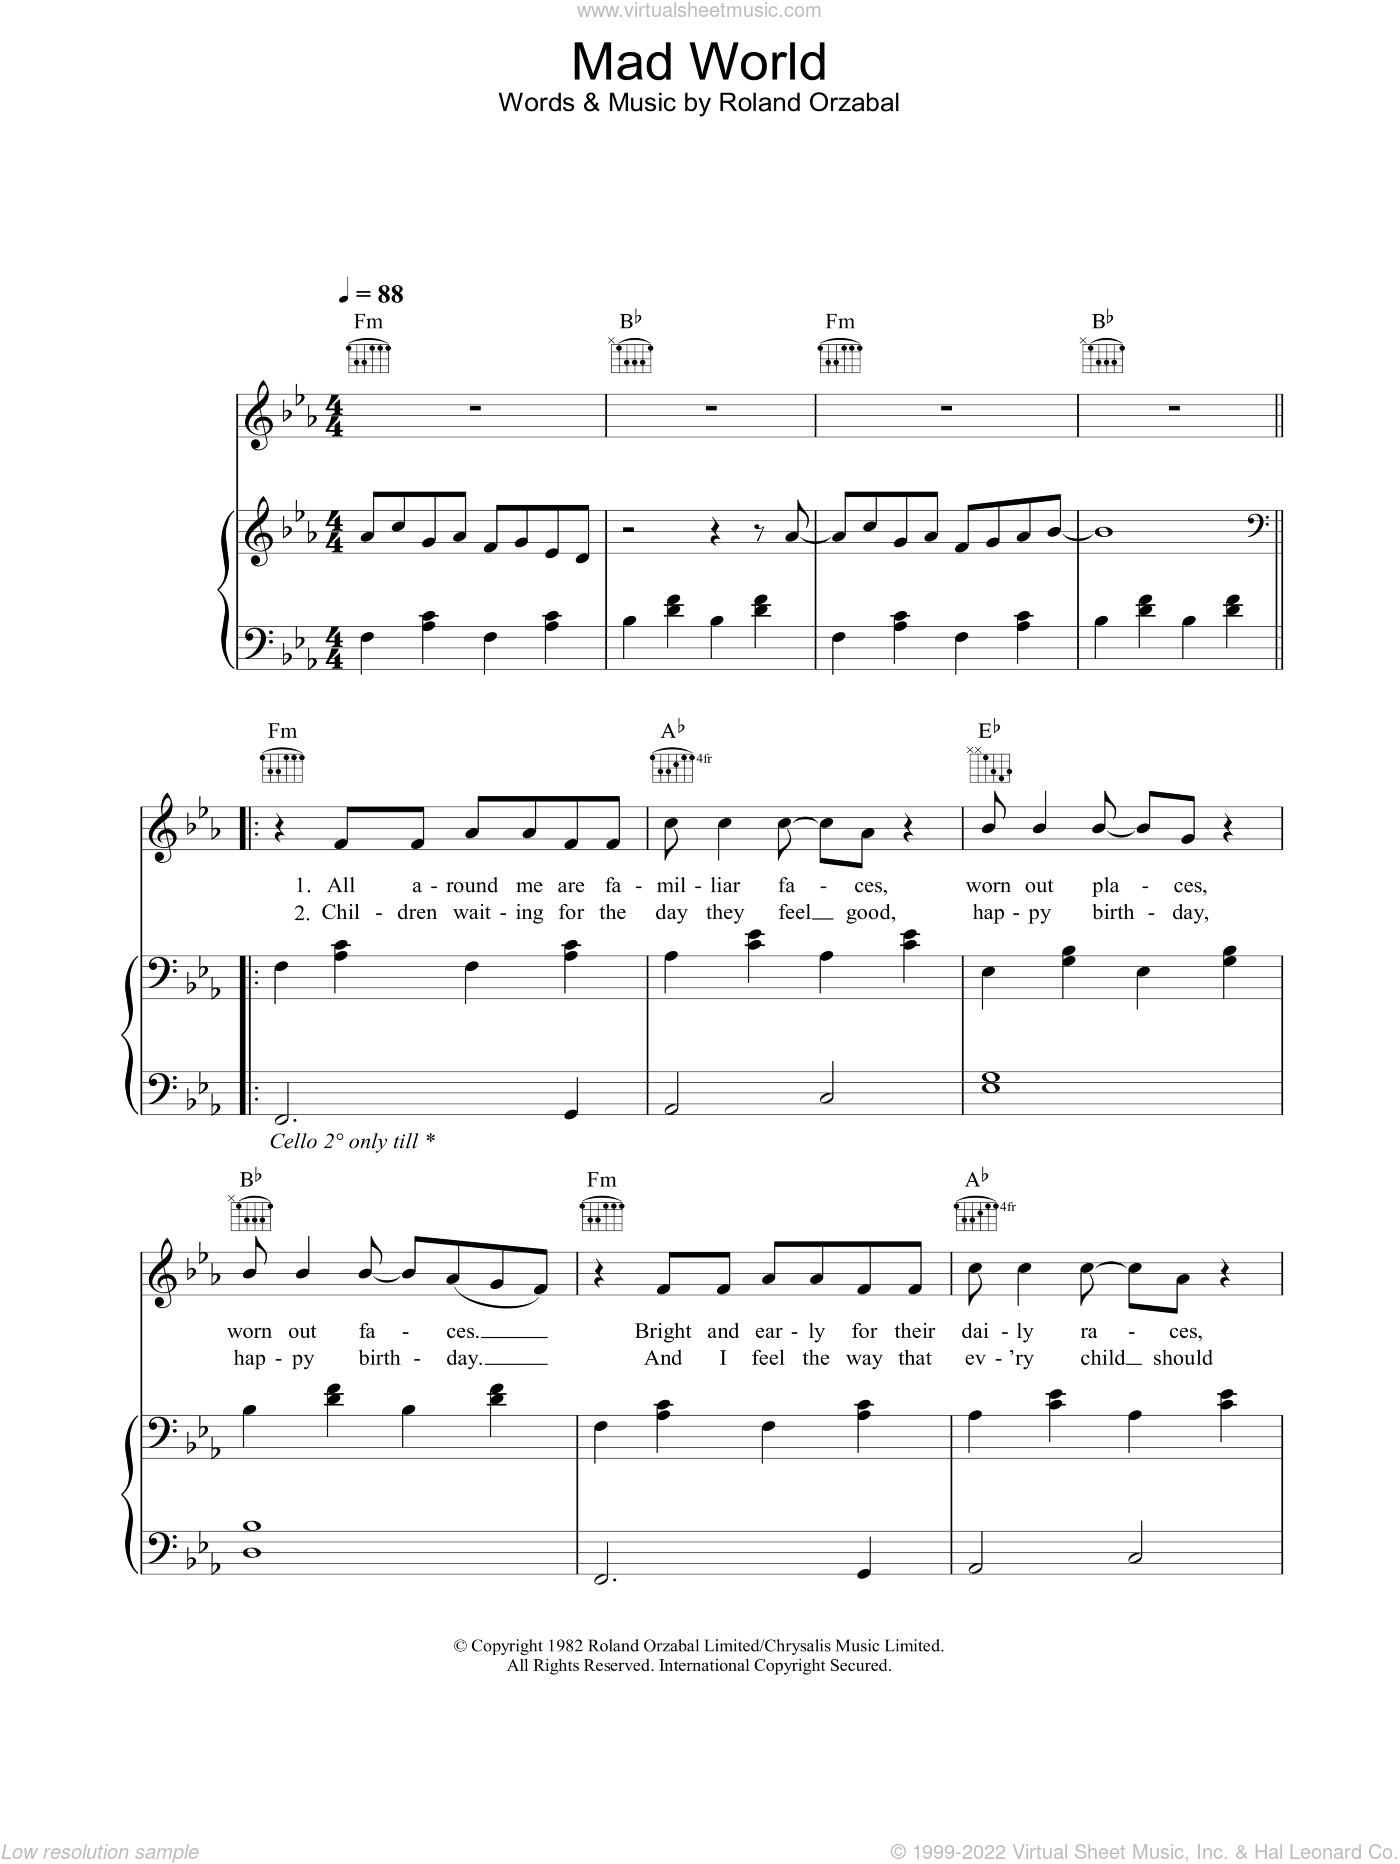 Mad World – Tears for Fears / Gary Jules letter notes for beginners - music  notes for newbies